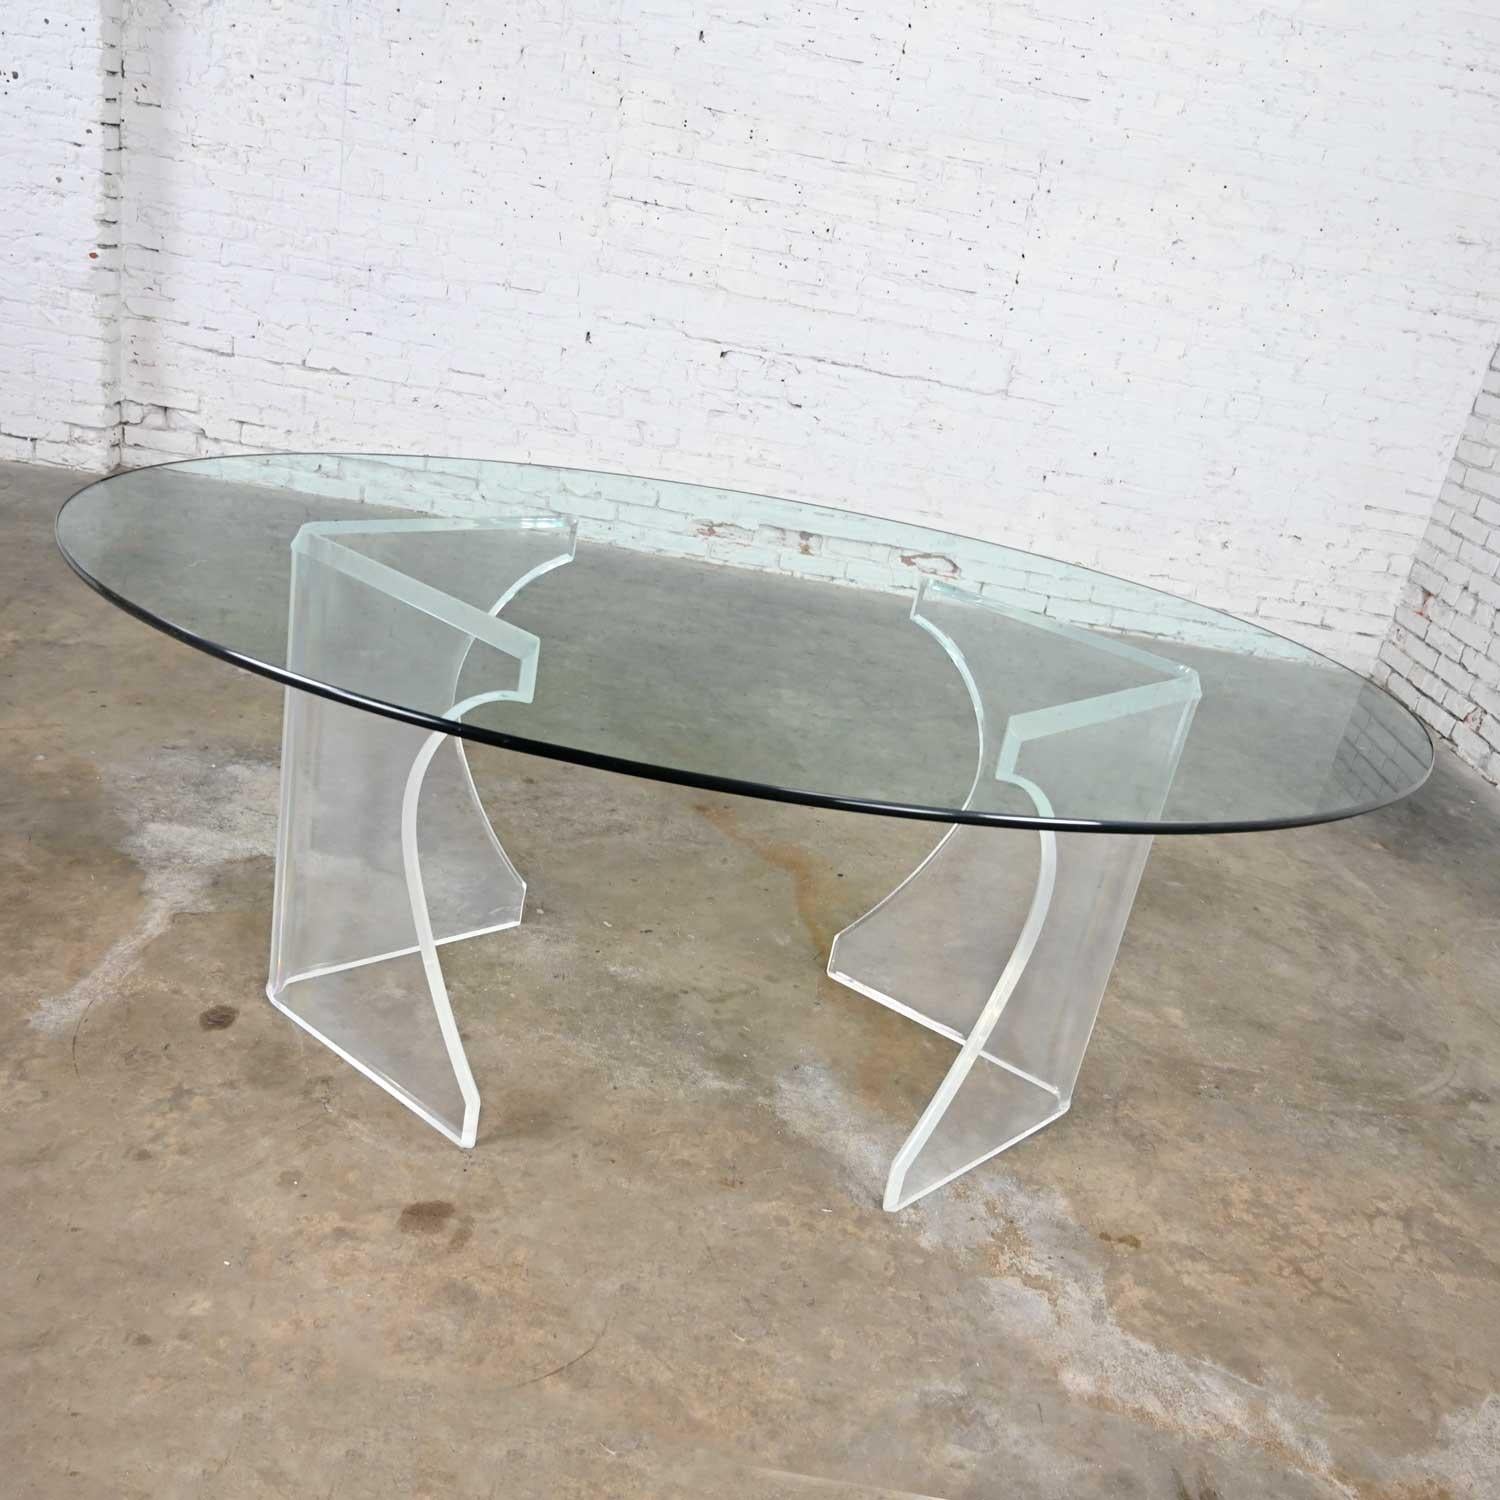 Modern Hollywood Regency Art Deco Lucite Sculptural Dining Table Oval Glass Top In Good Condition For Sale In Topeka, KS